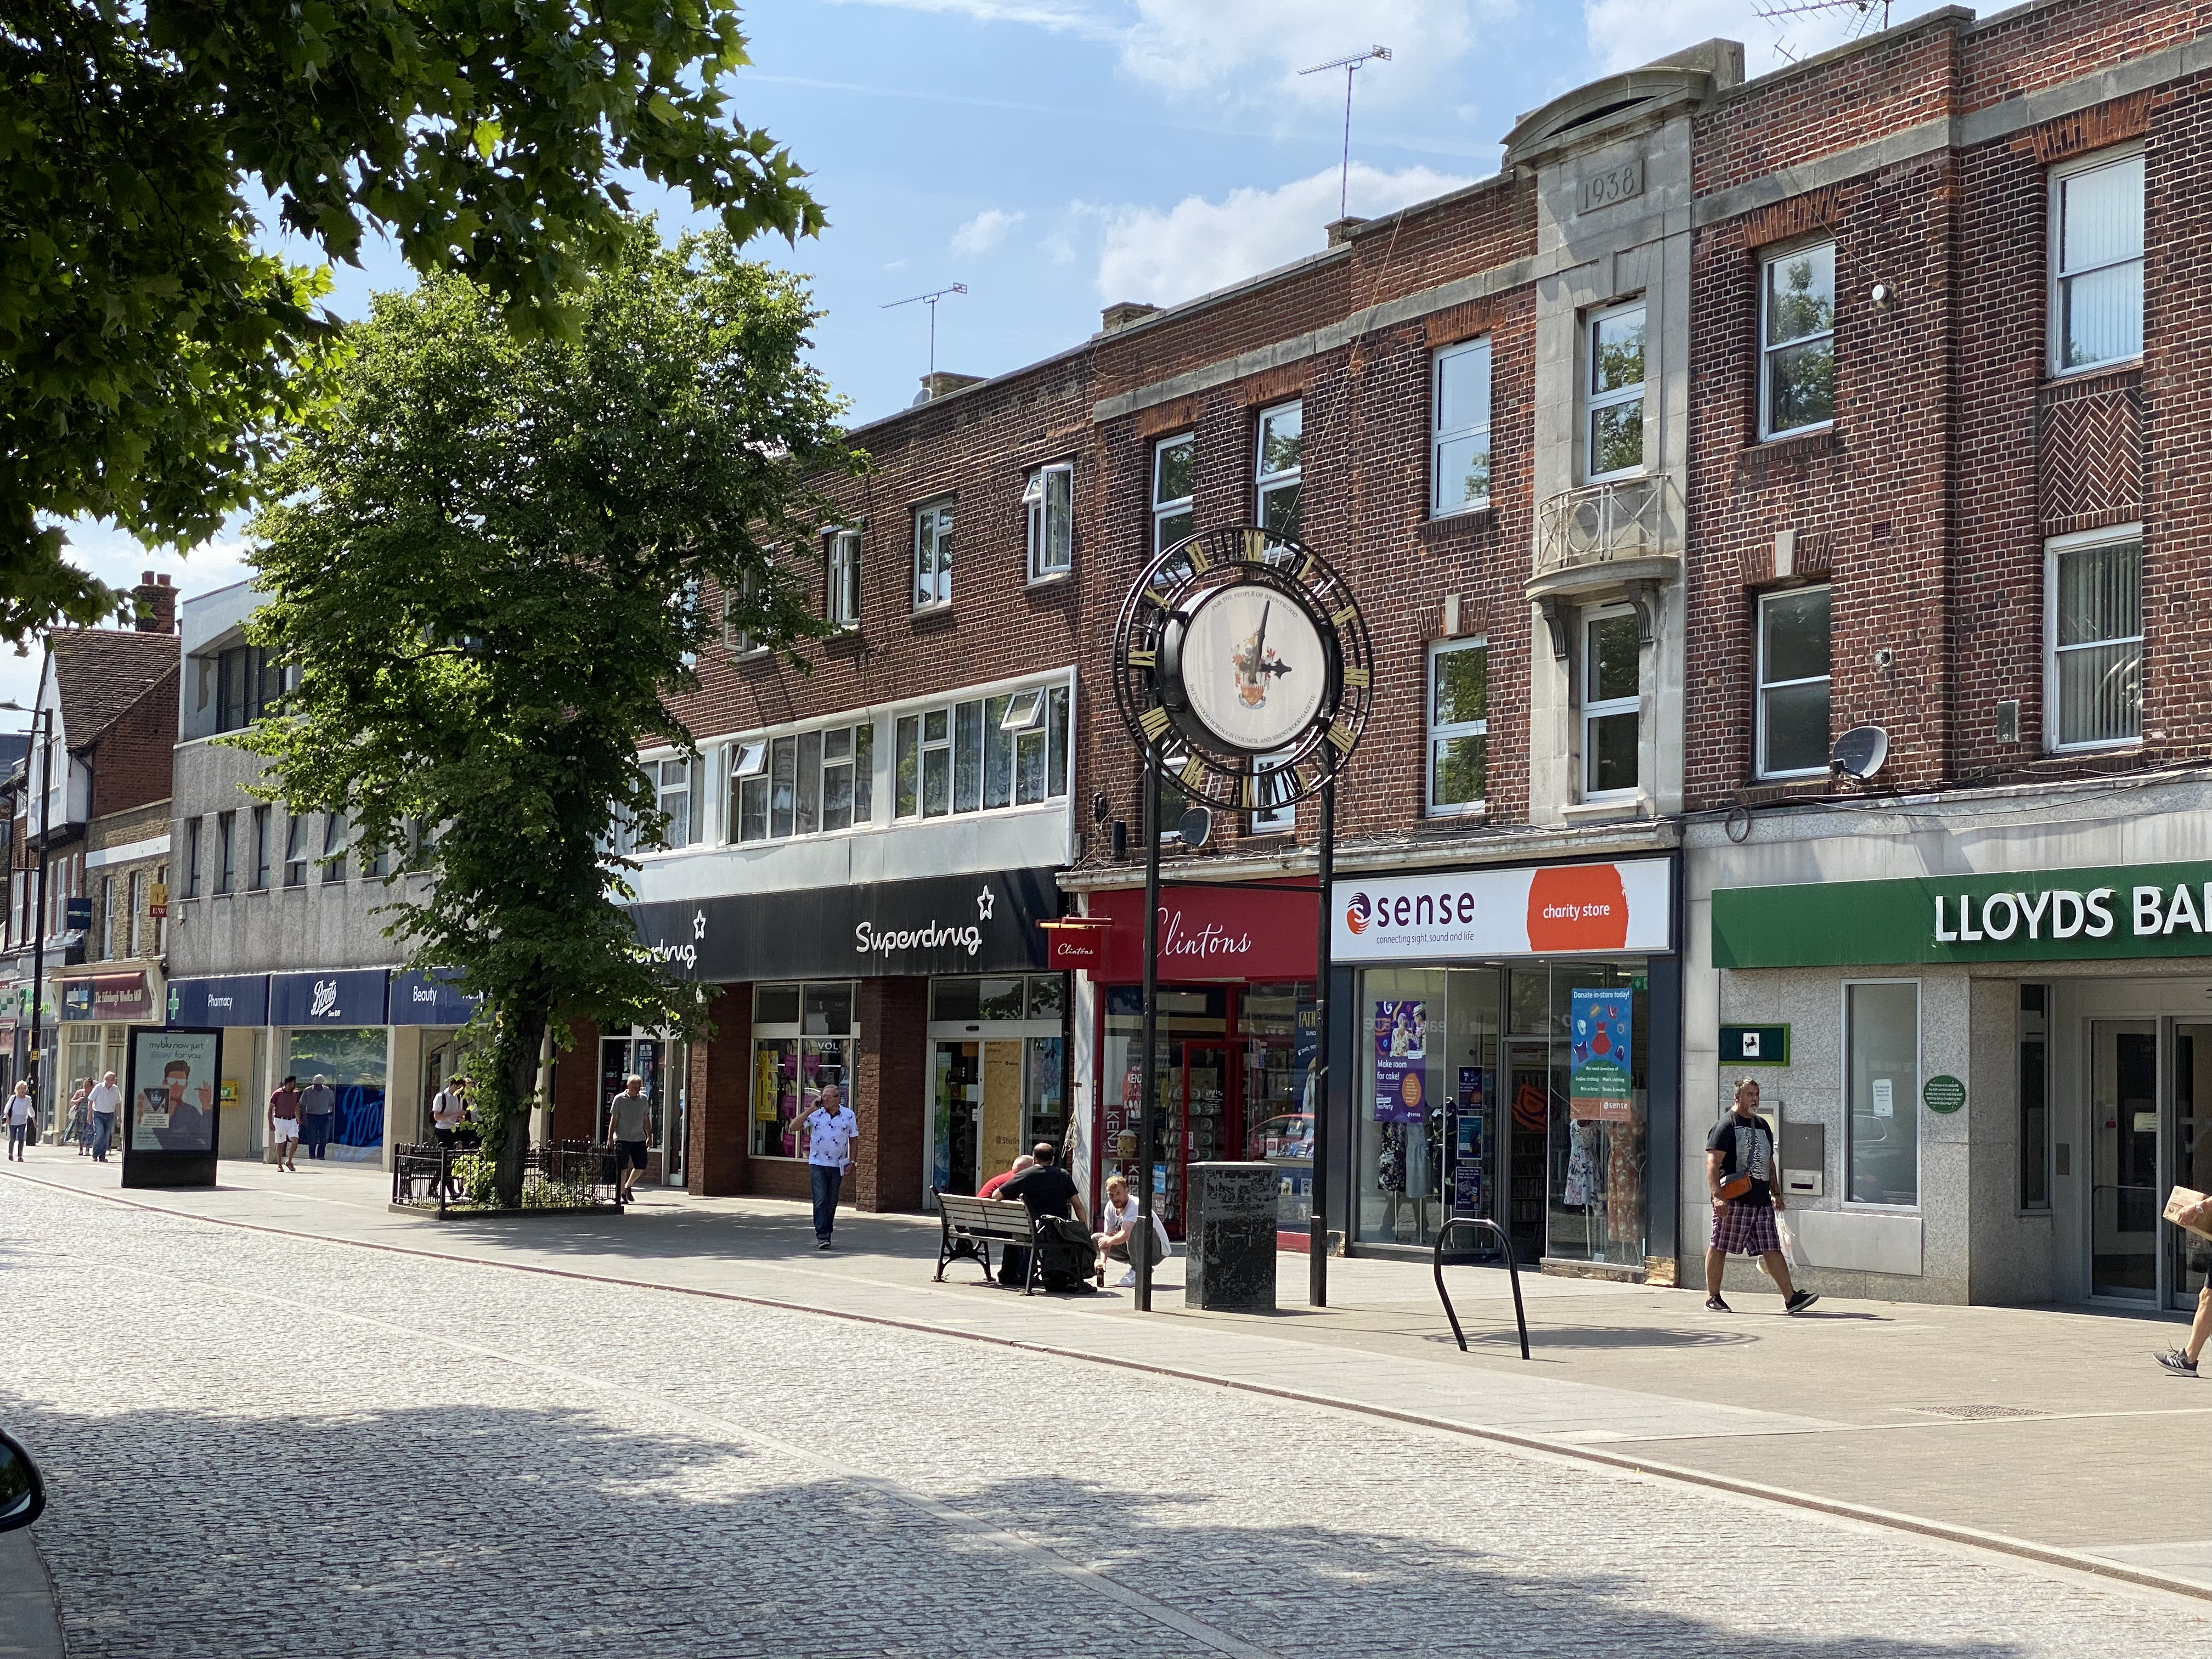 View of Brentwood High Street on a sunny day featuring the Brentwood Town Centre clock, trees and shops including Boots, Superdrug, Clintons, Sense charity store and Lloyds Bank